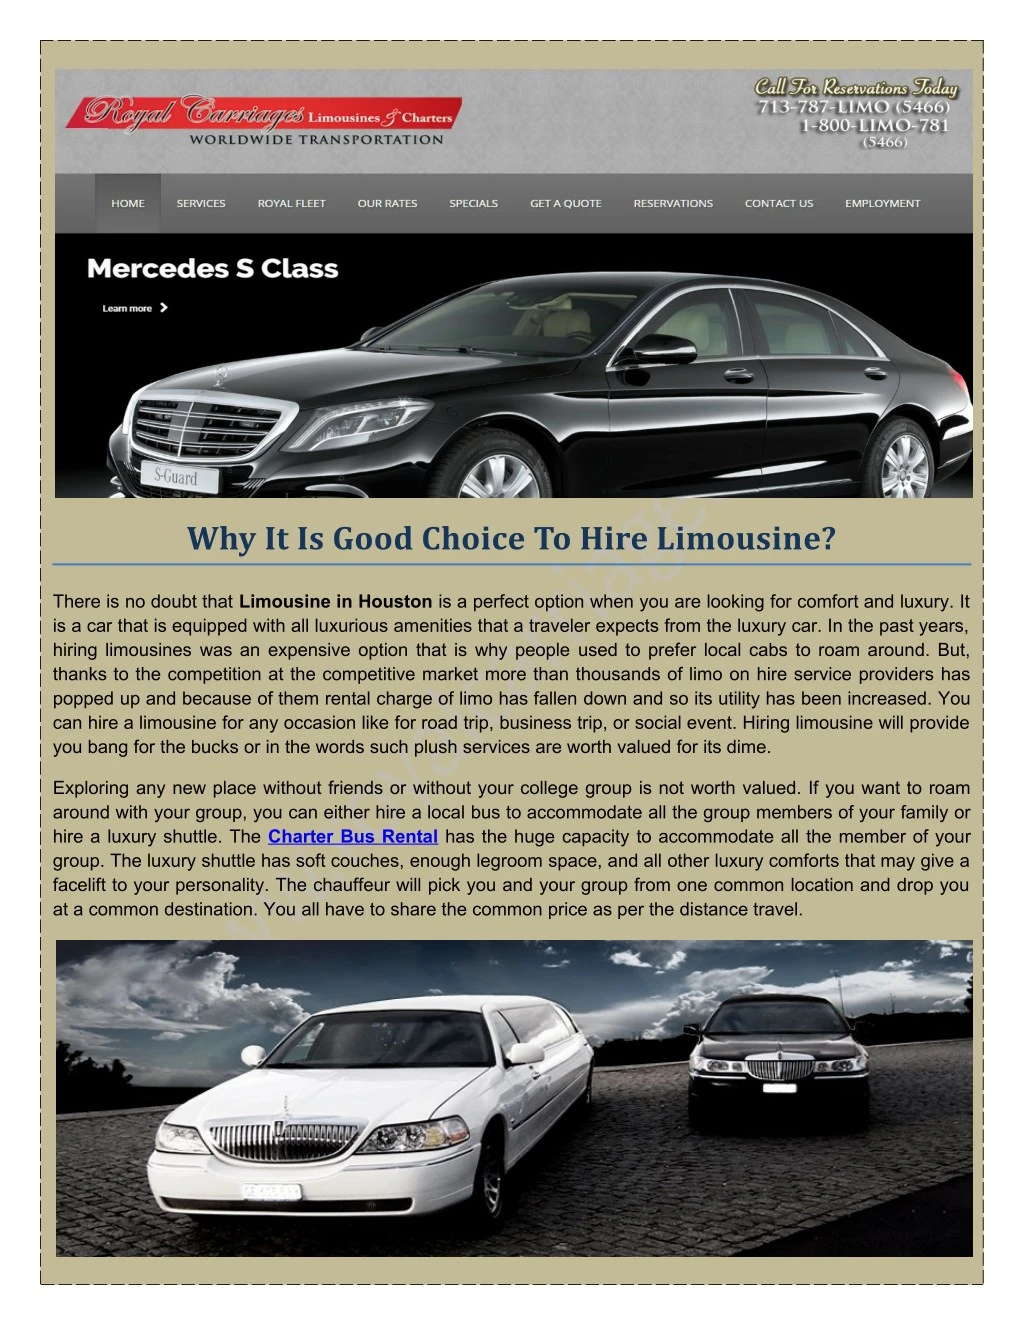 why it is good choice to hire limousine